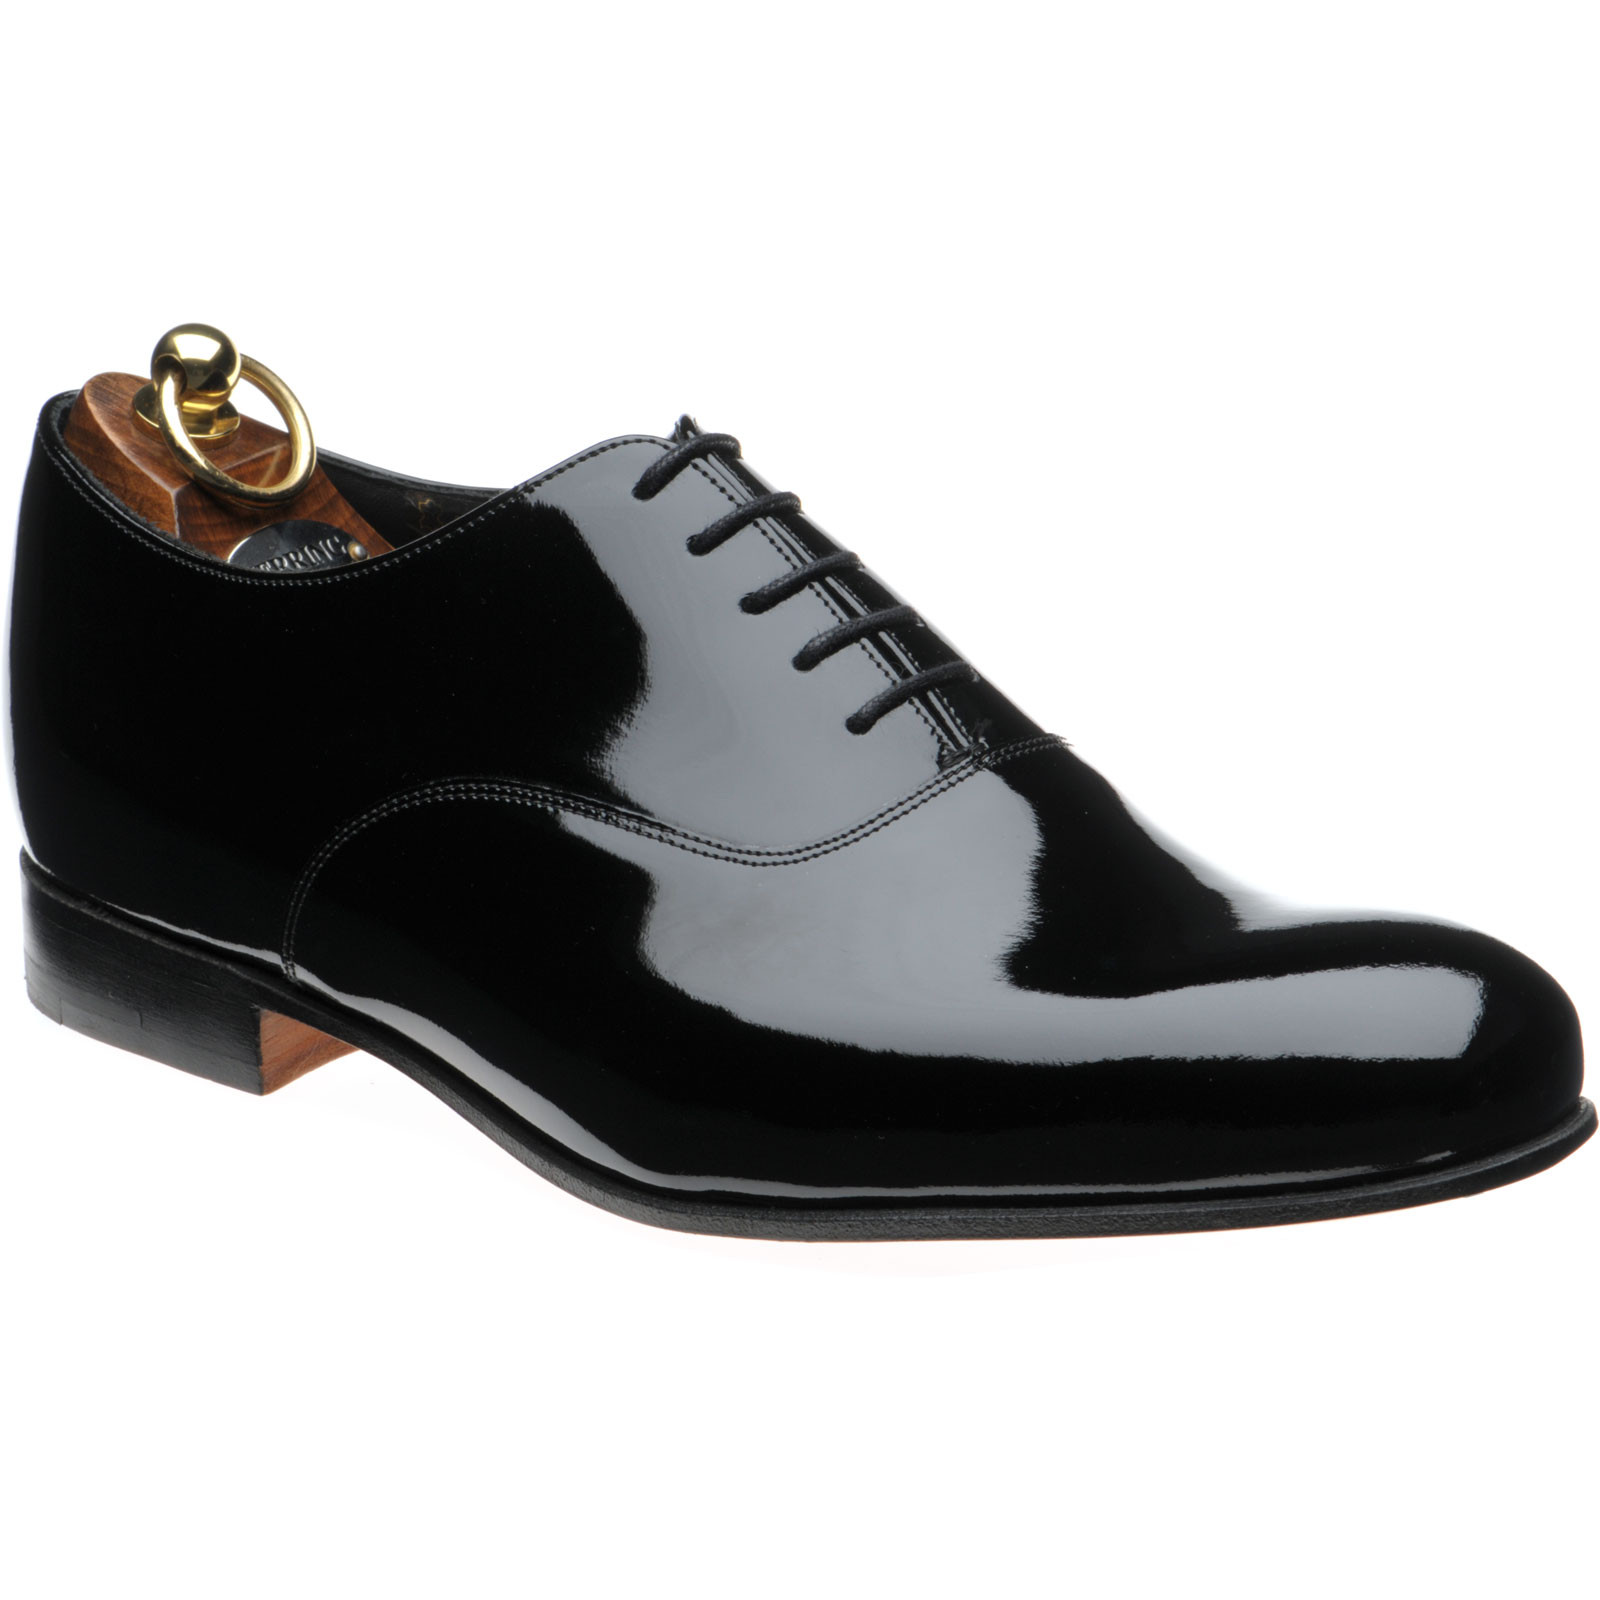 Barker shoes | Barker Factory Seconds | HMS0999 in Black Patent Leather ...